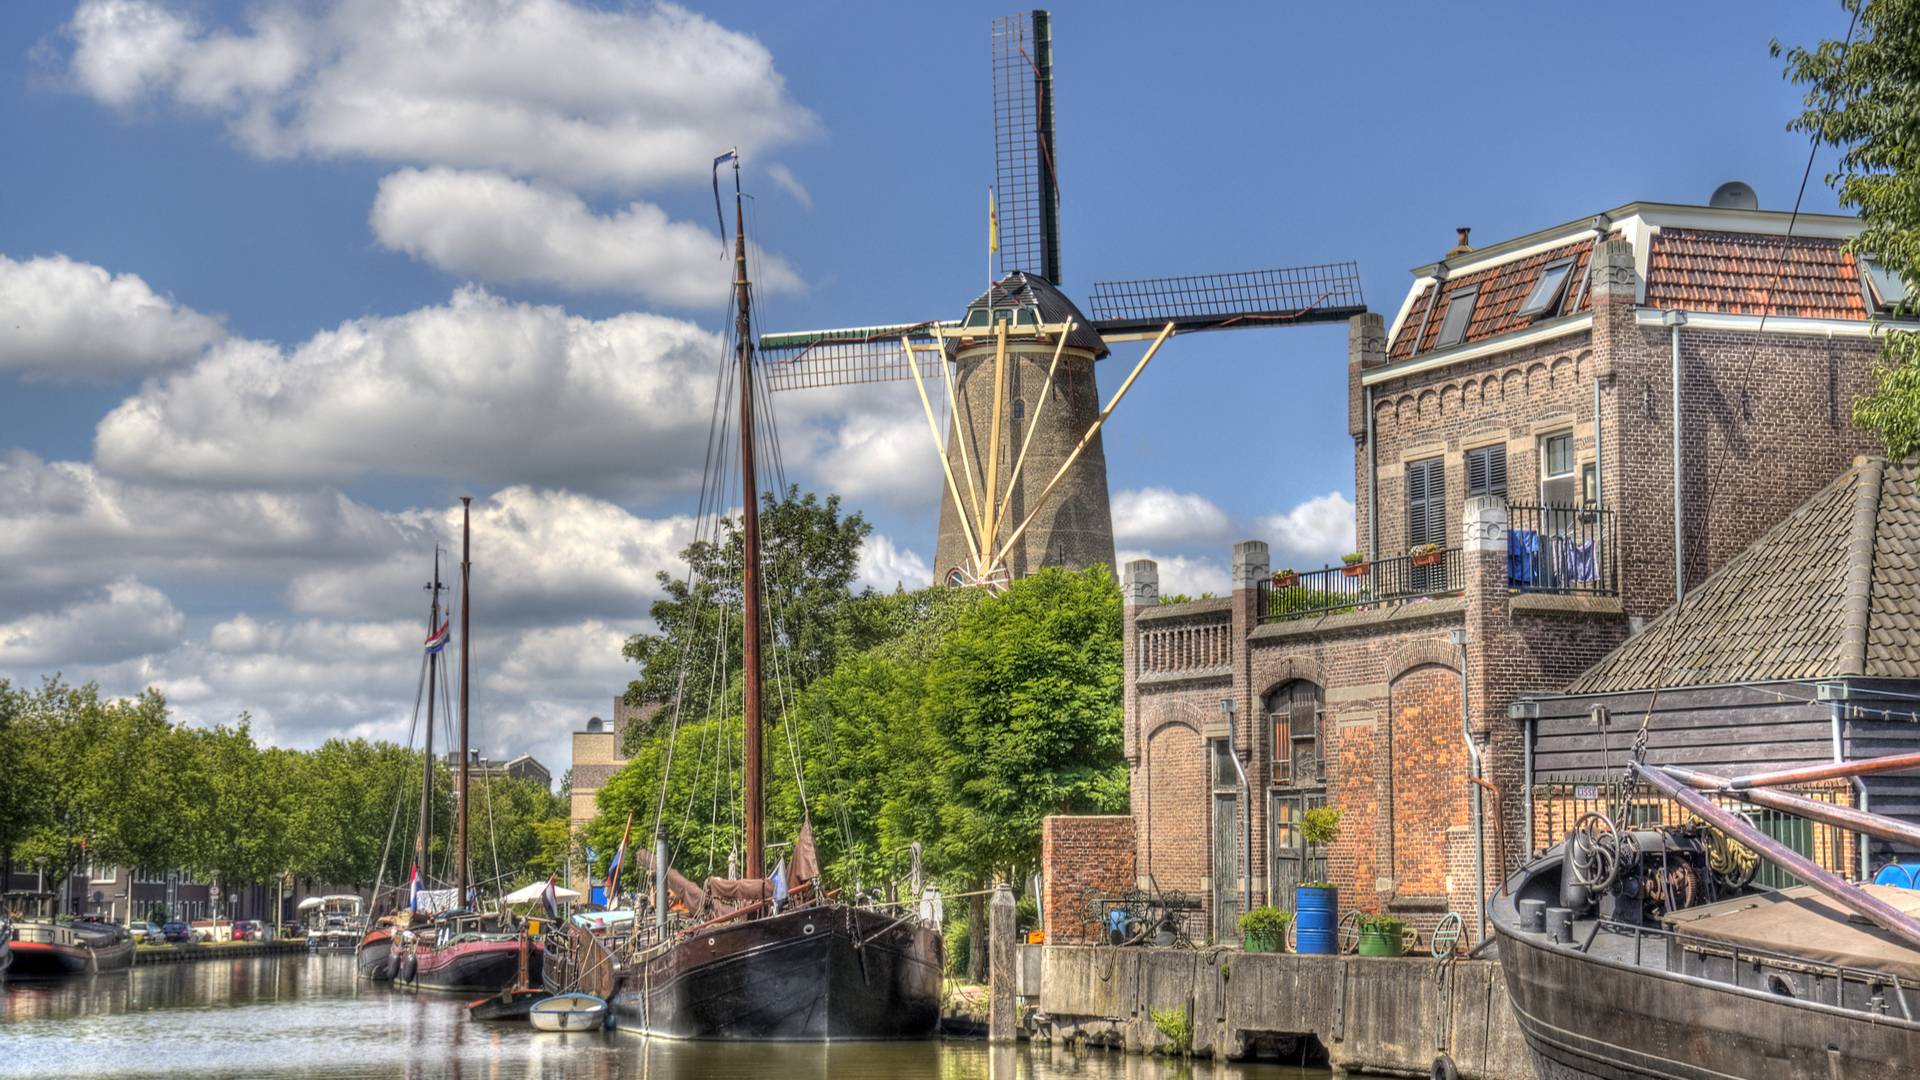 Windmill and boats canal Gouda